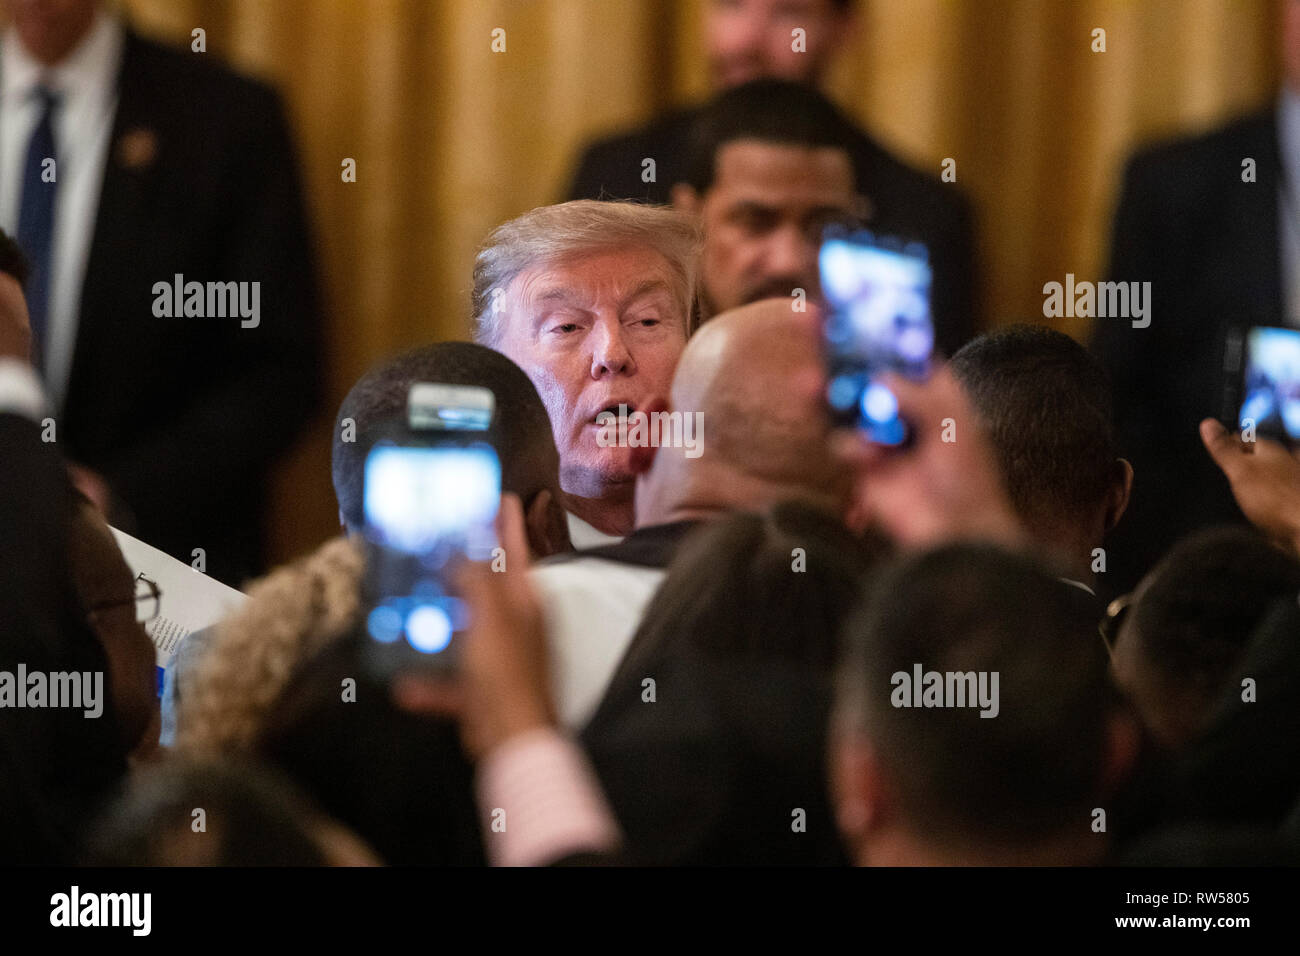 U.S. President Donald Trump greets guests after speaking at a National African American History Month reception at the White House in Washington, D.C., U.S., on Thursday, Feb. 21, 2019. Stock Photo